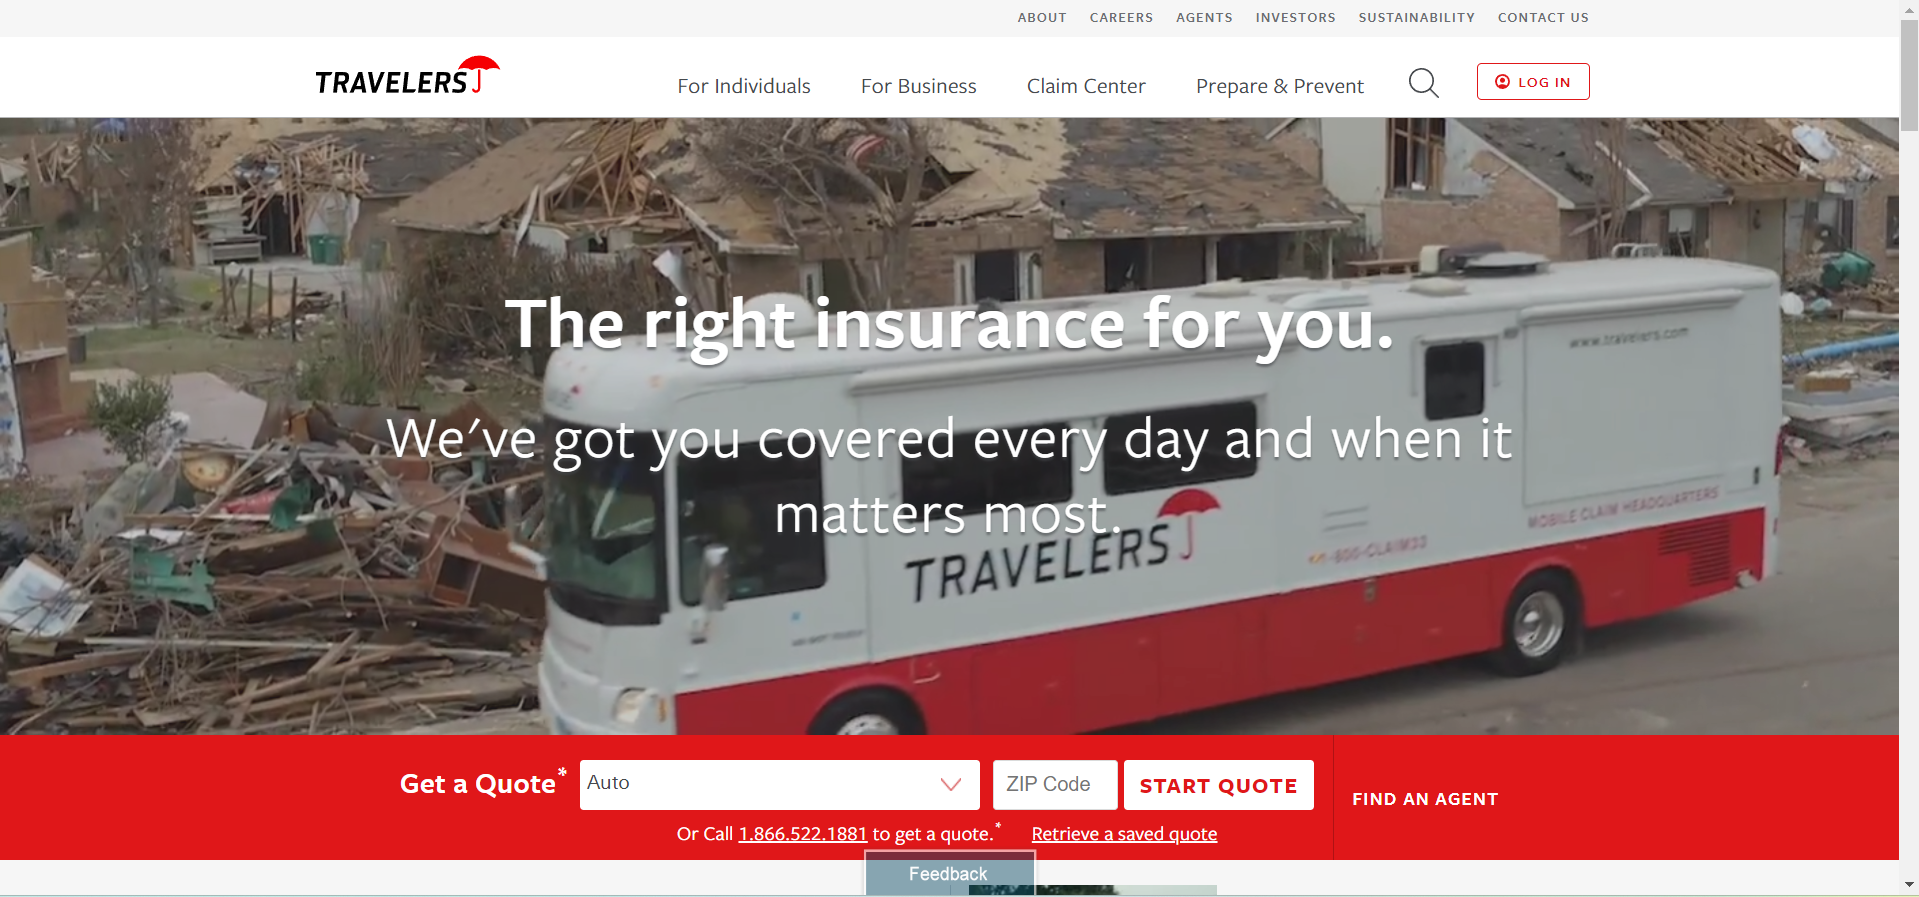 Travelers: Best Business Insurance for Lawyers